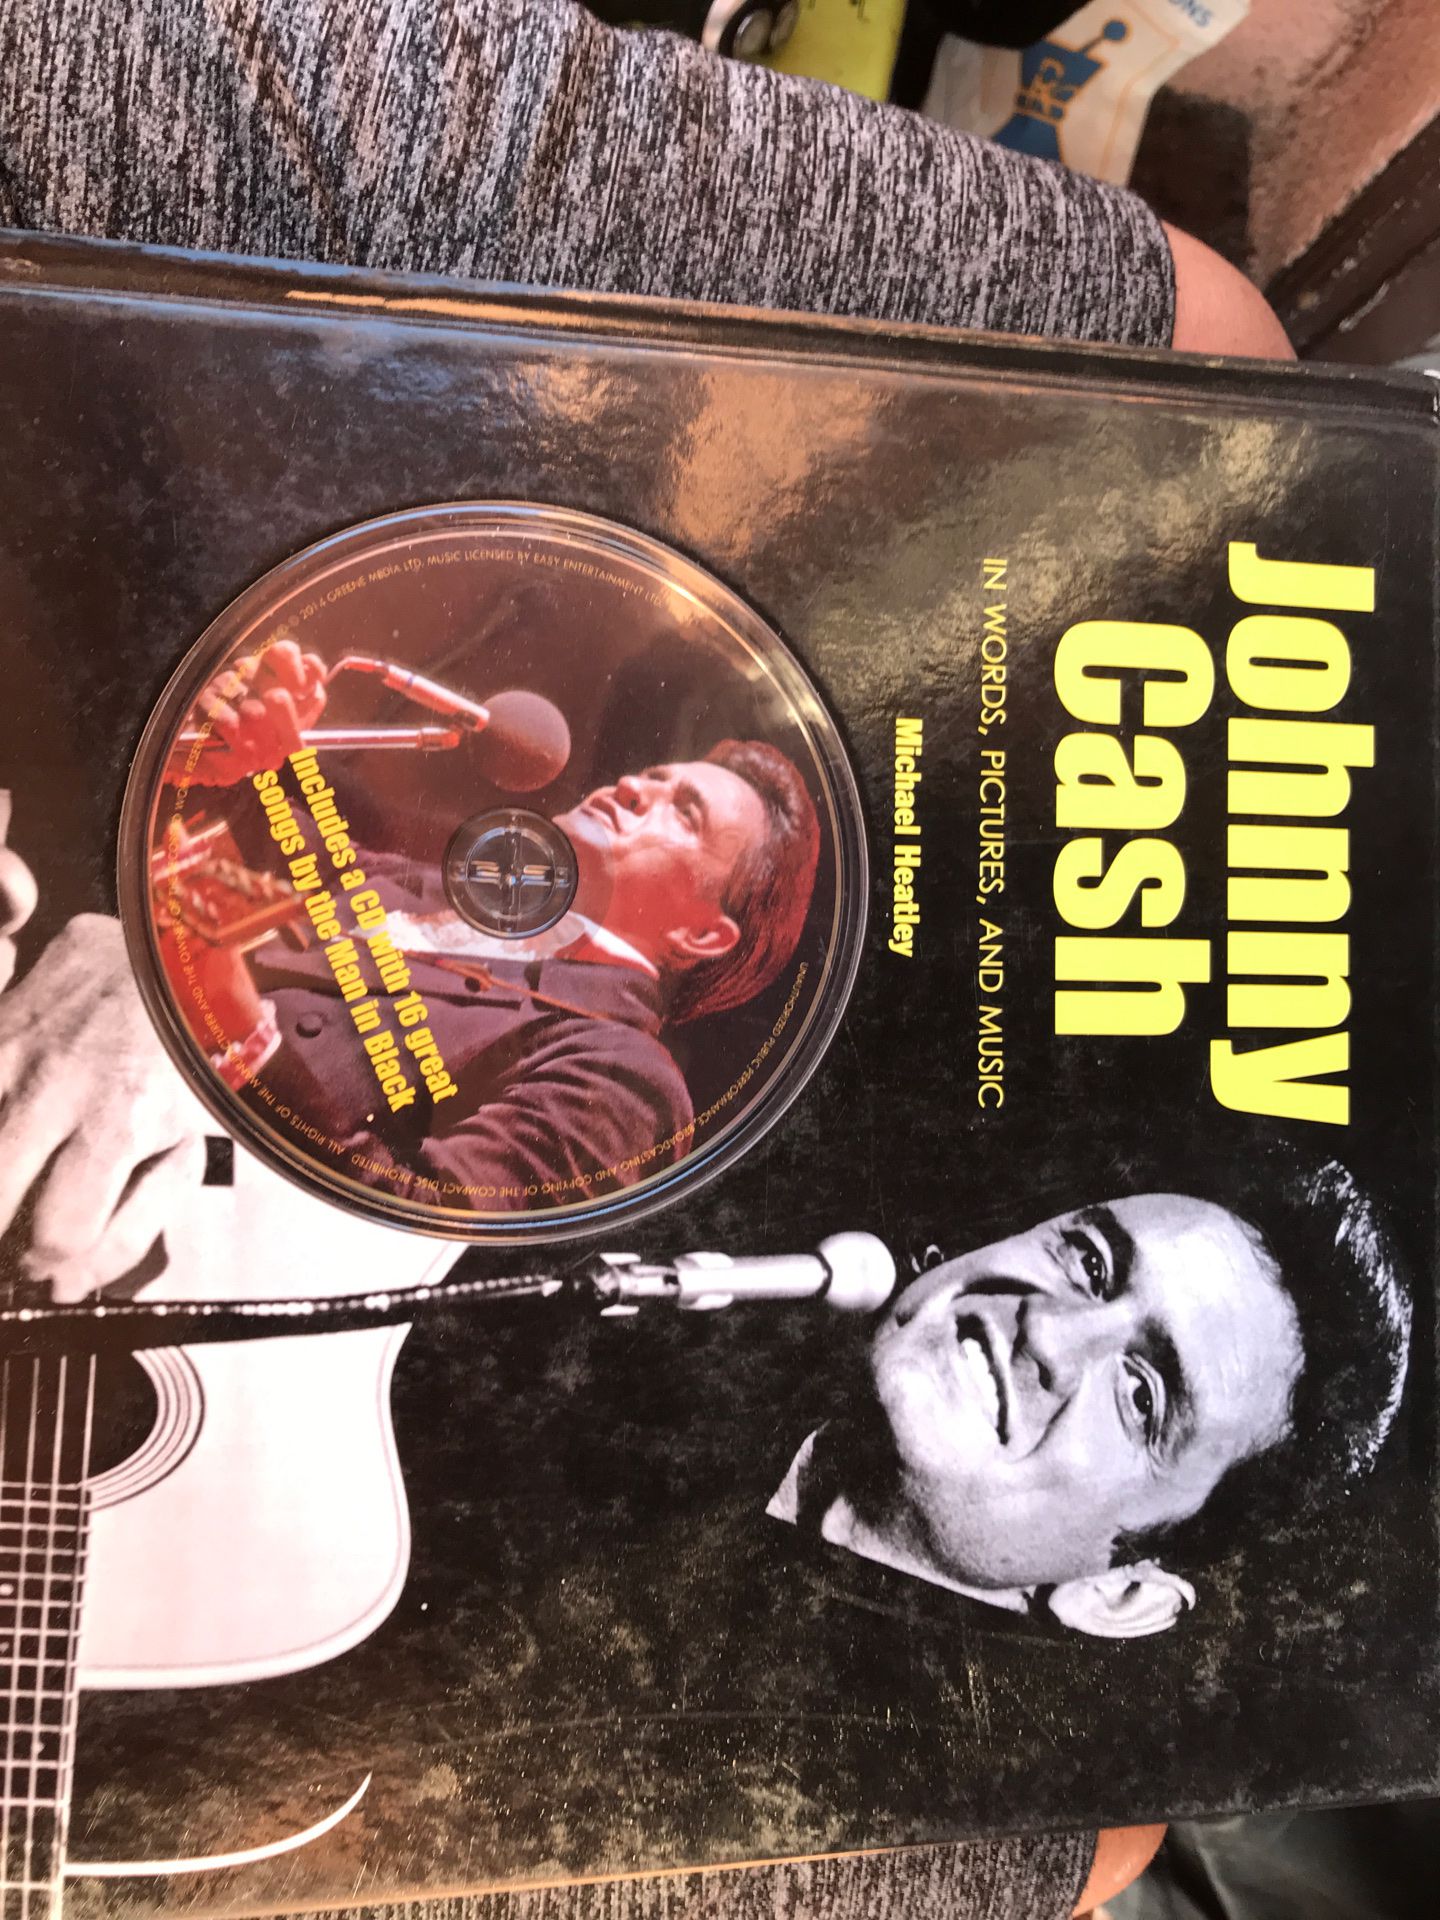 Johnny cash in words pictures and music book!